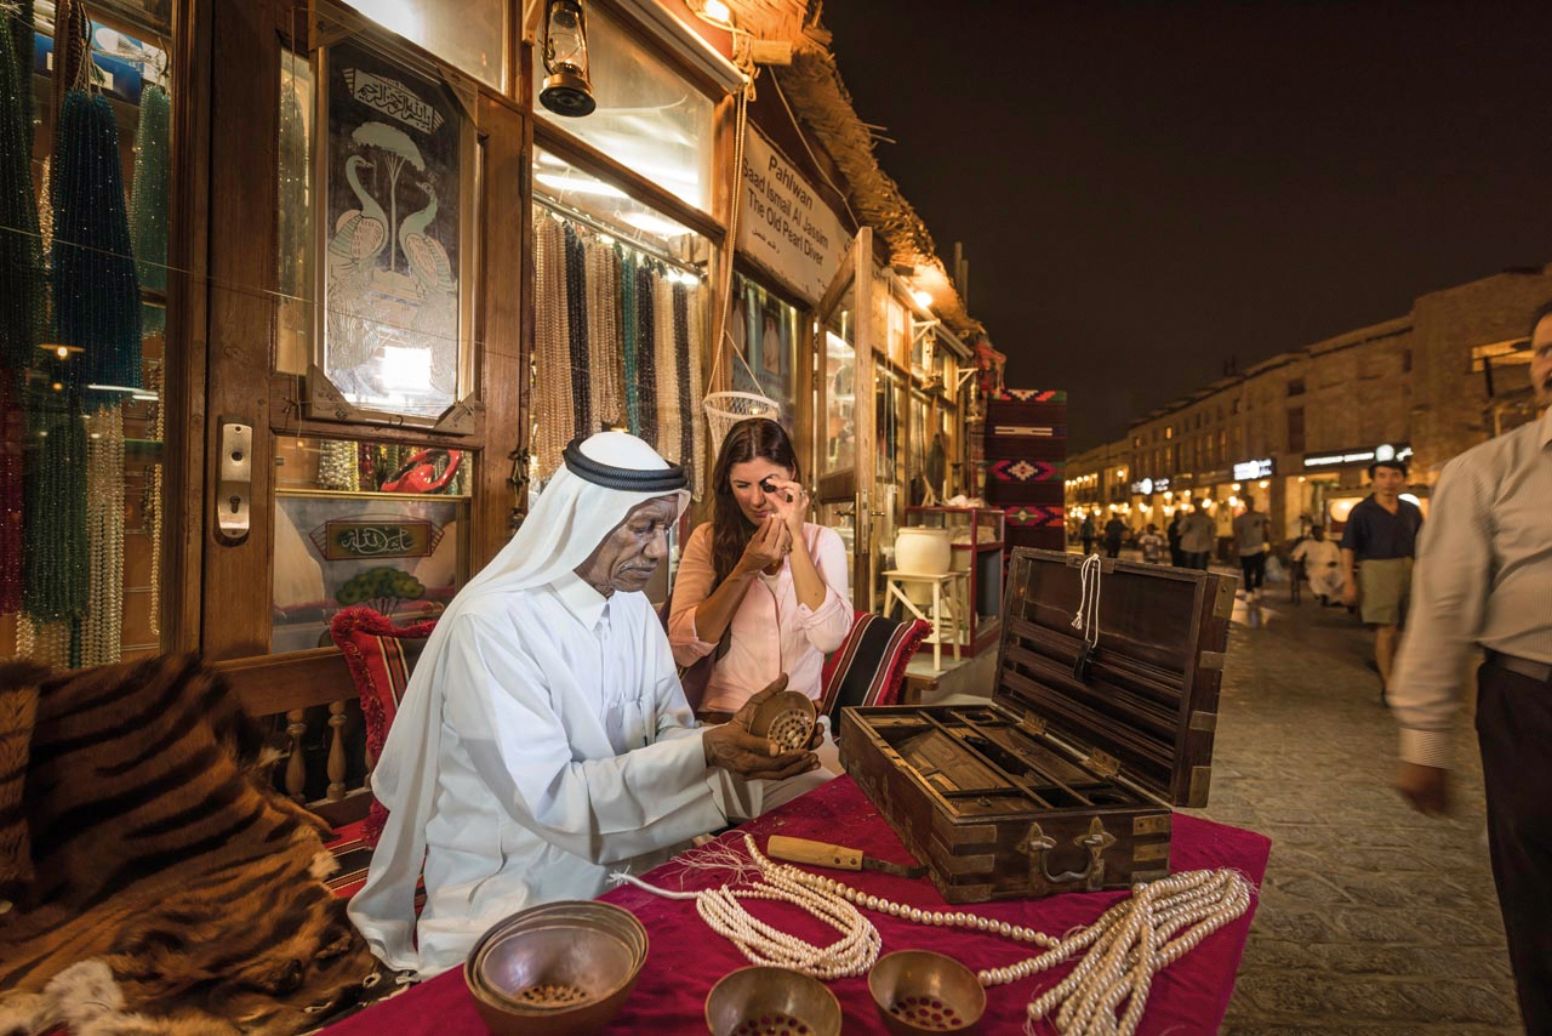 A person sits behind a market stall in Souq Watif selling pearls. Strings of pearls lie on the table in front of them, and they're pouring pearls out of a metal bowl into their hand. A leather case is open on the table. A second person is sitting next to them. This second person is holding a pearl in one hand, and is holding a loupe up to their eye with the other. Behind the pair, more strings of pearls hang from railings. Other stalls stretch away from them into the distance.